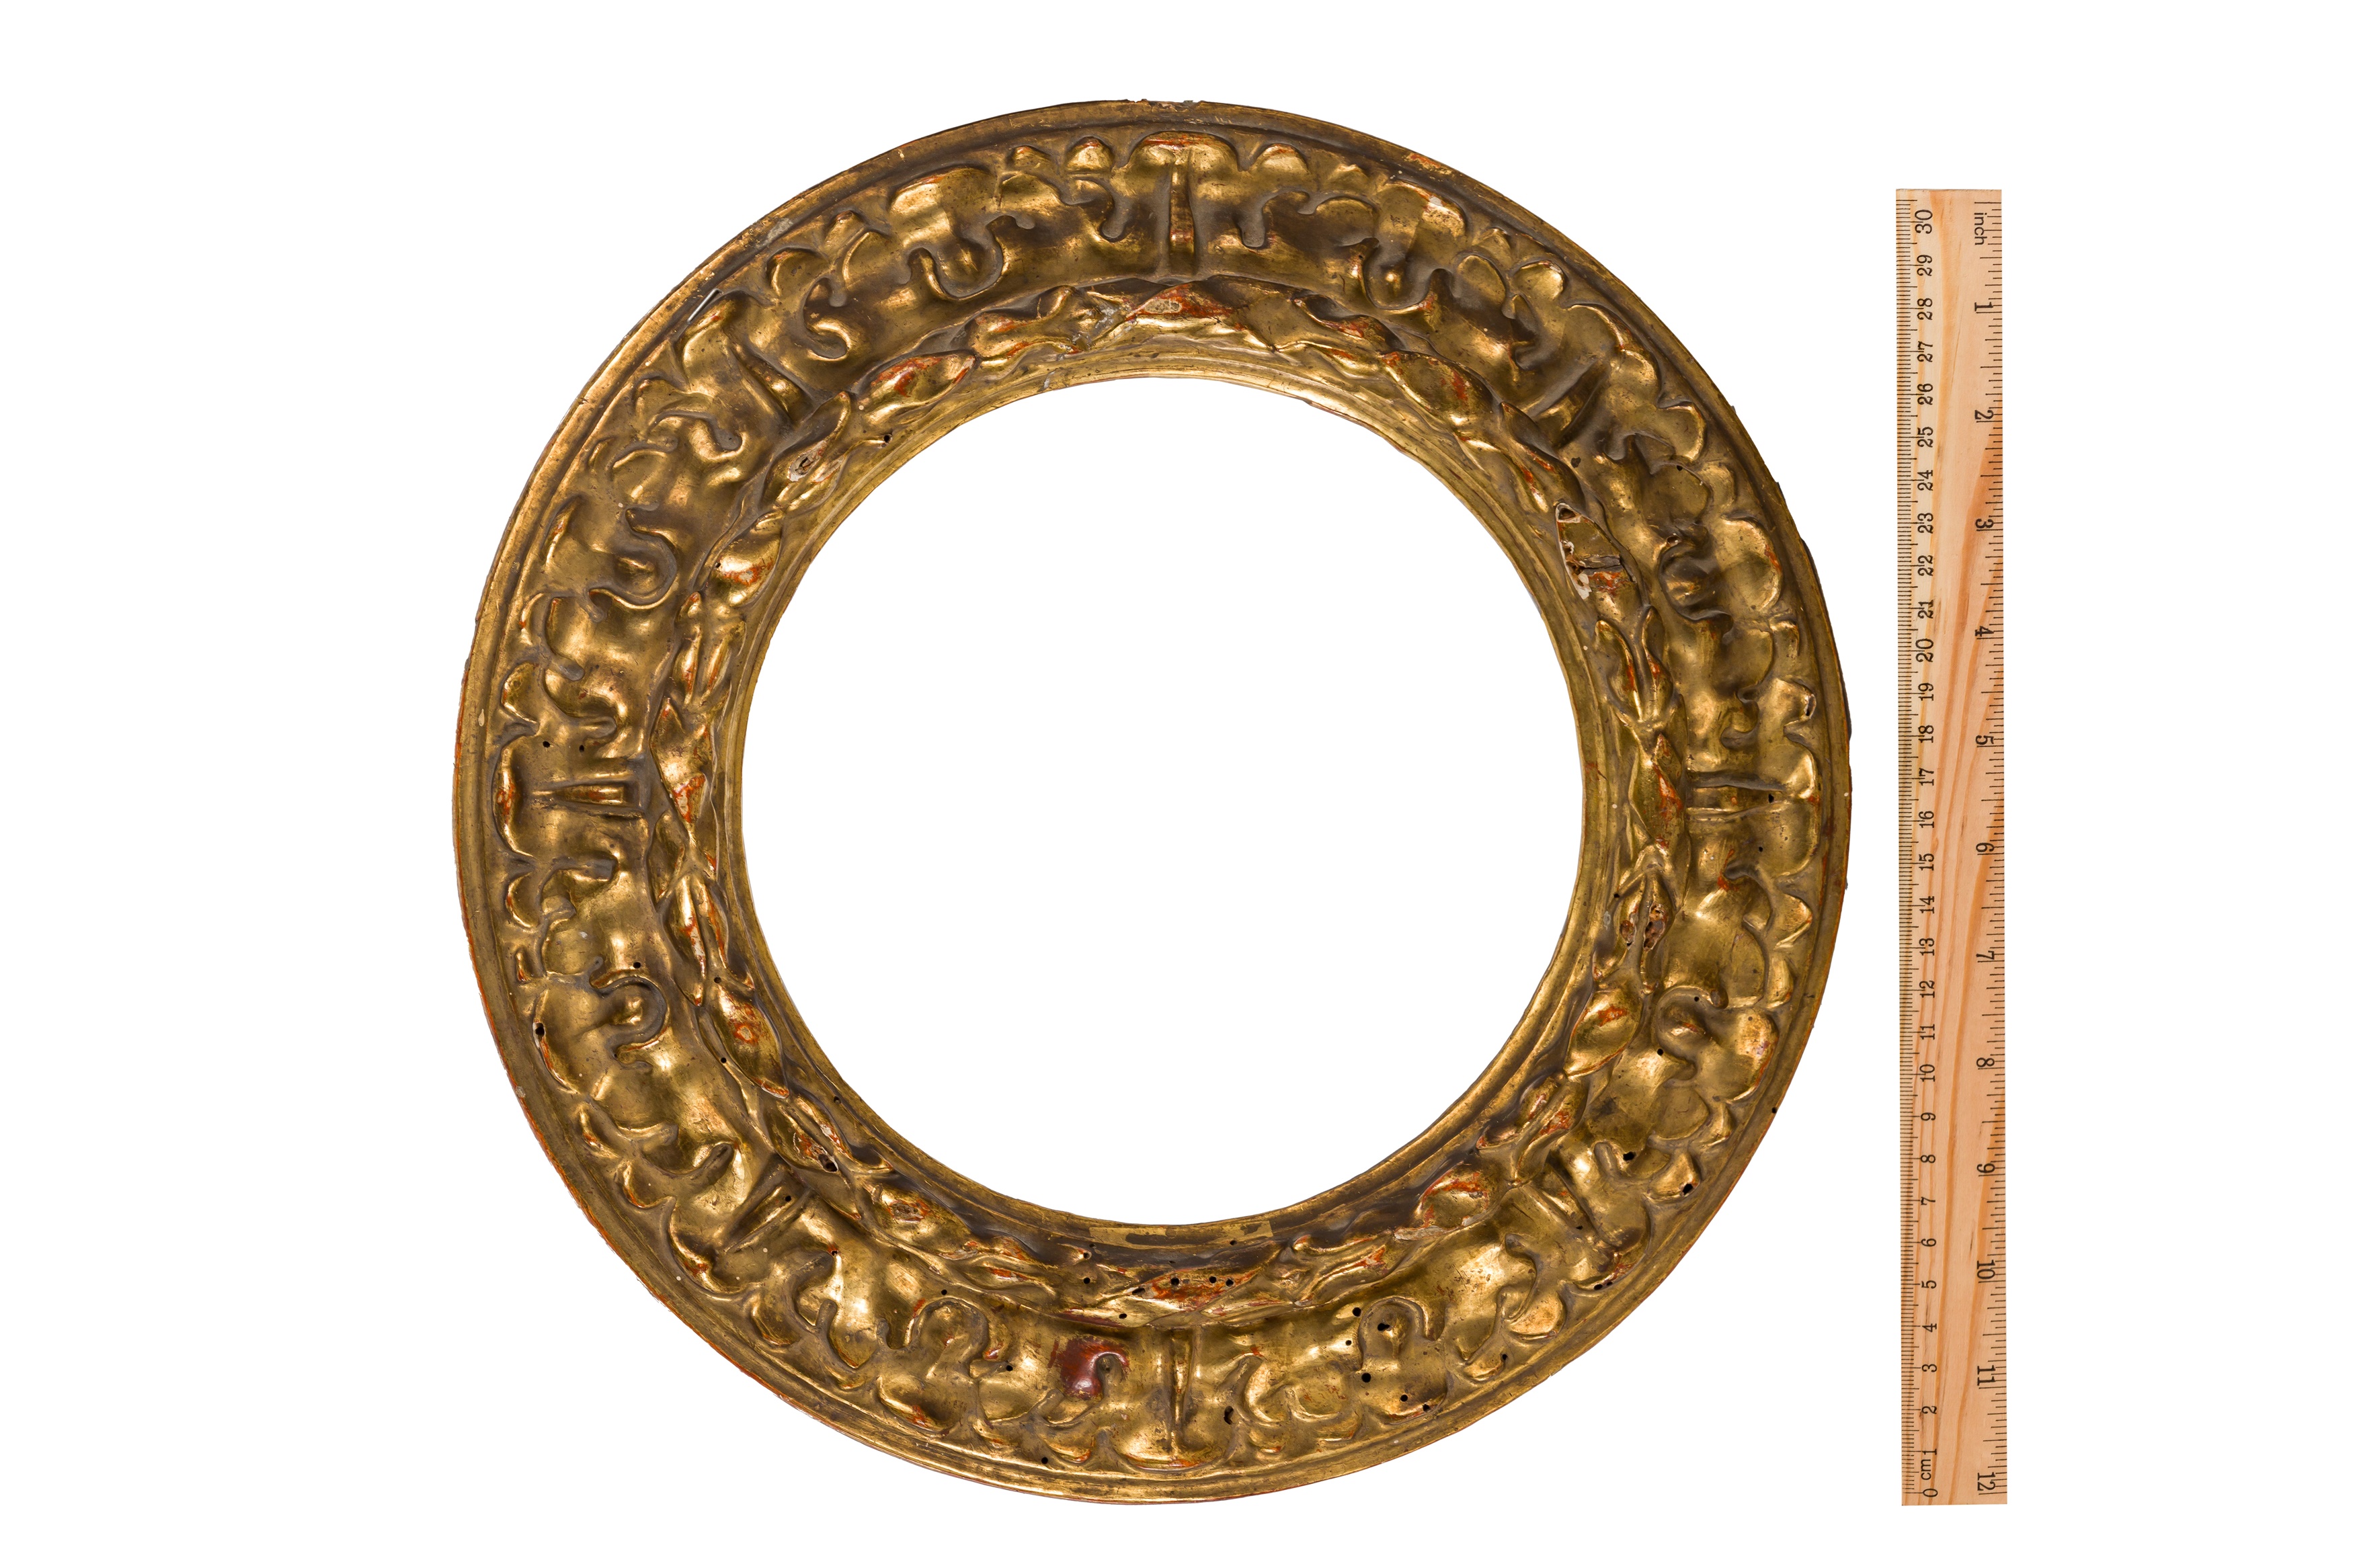 A VENETIAN 18/19TH CENTURY TONDO CARVED AND GILDED RECEDING PROFILE FRAME - Image 4 of 4